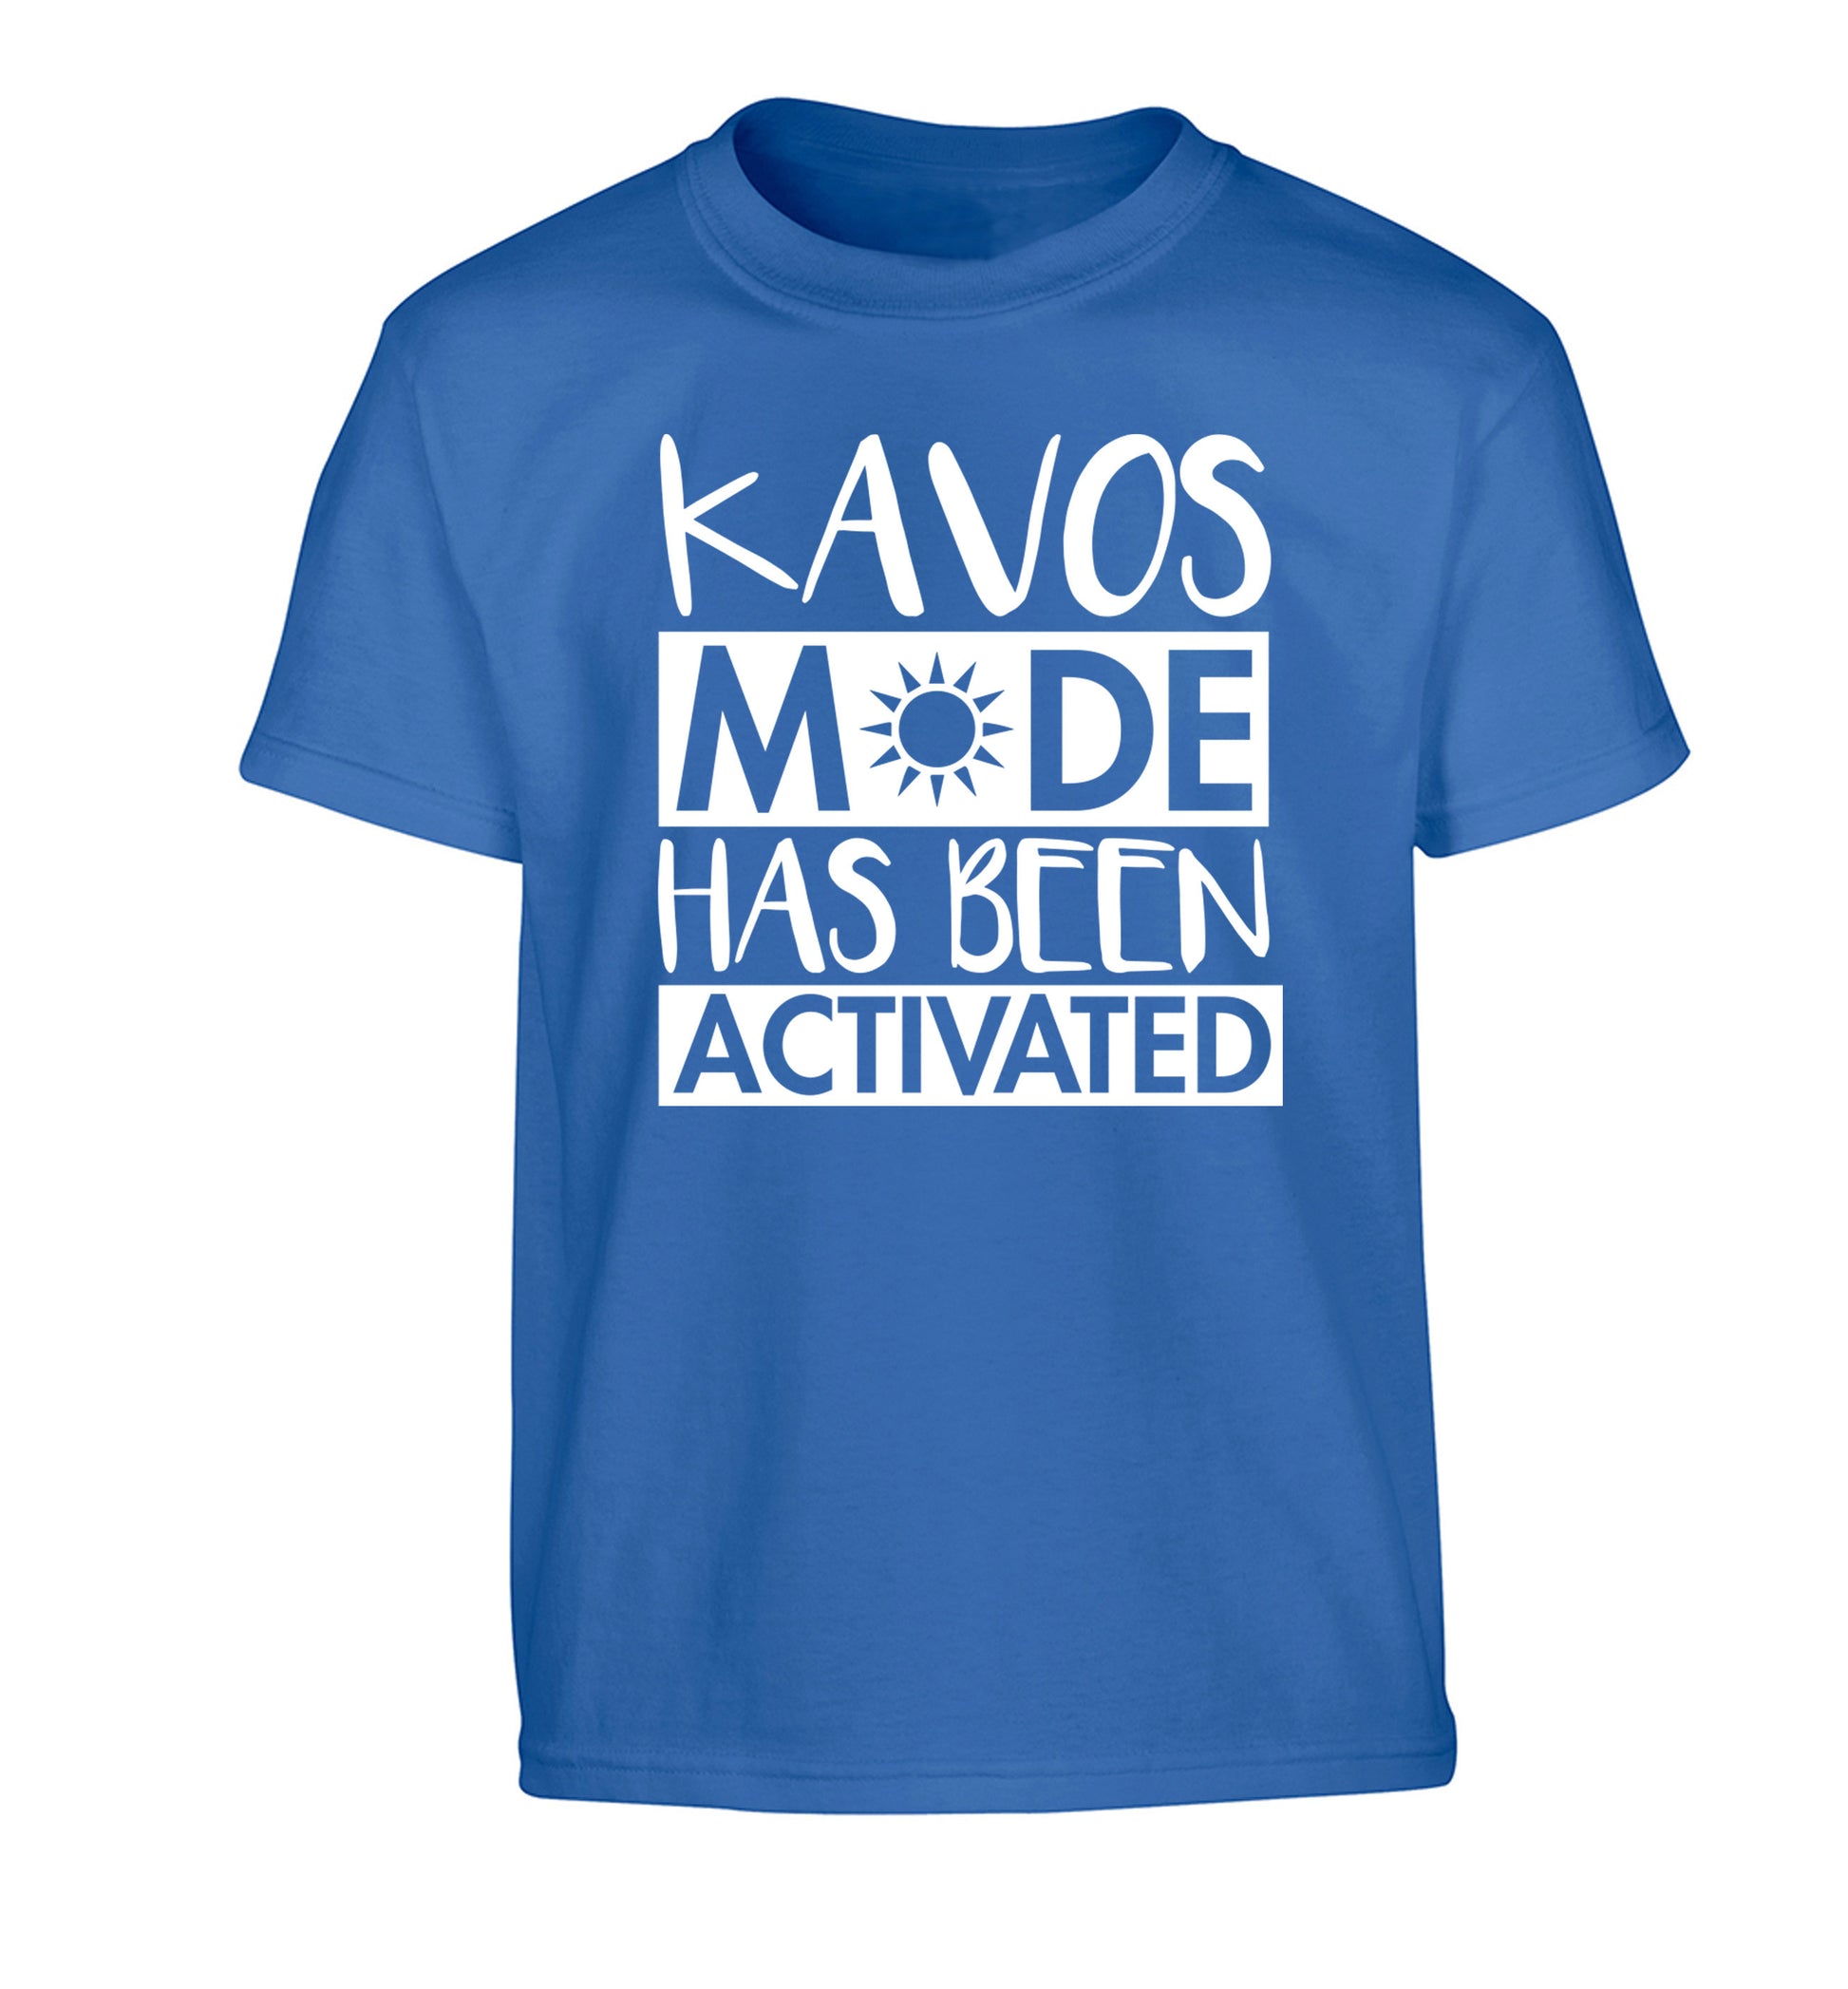 Kavos mode has been activated Children's blue Tshirt 12-14 Years